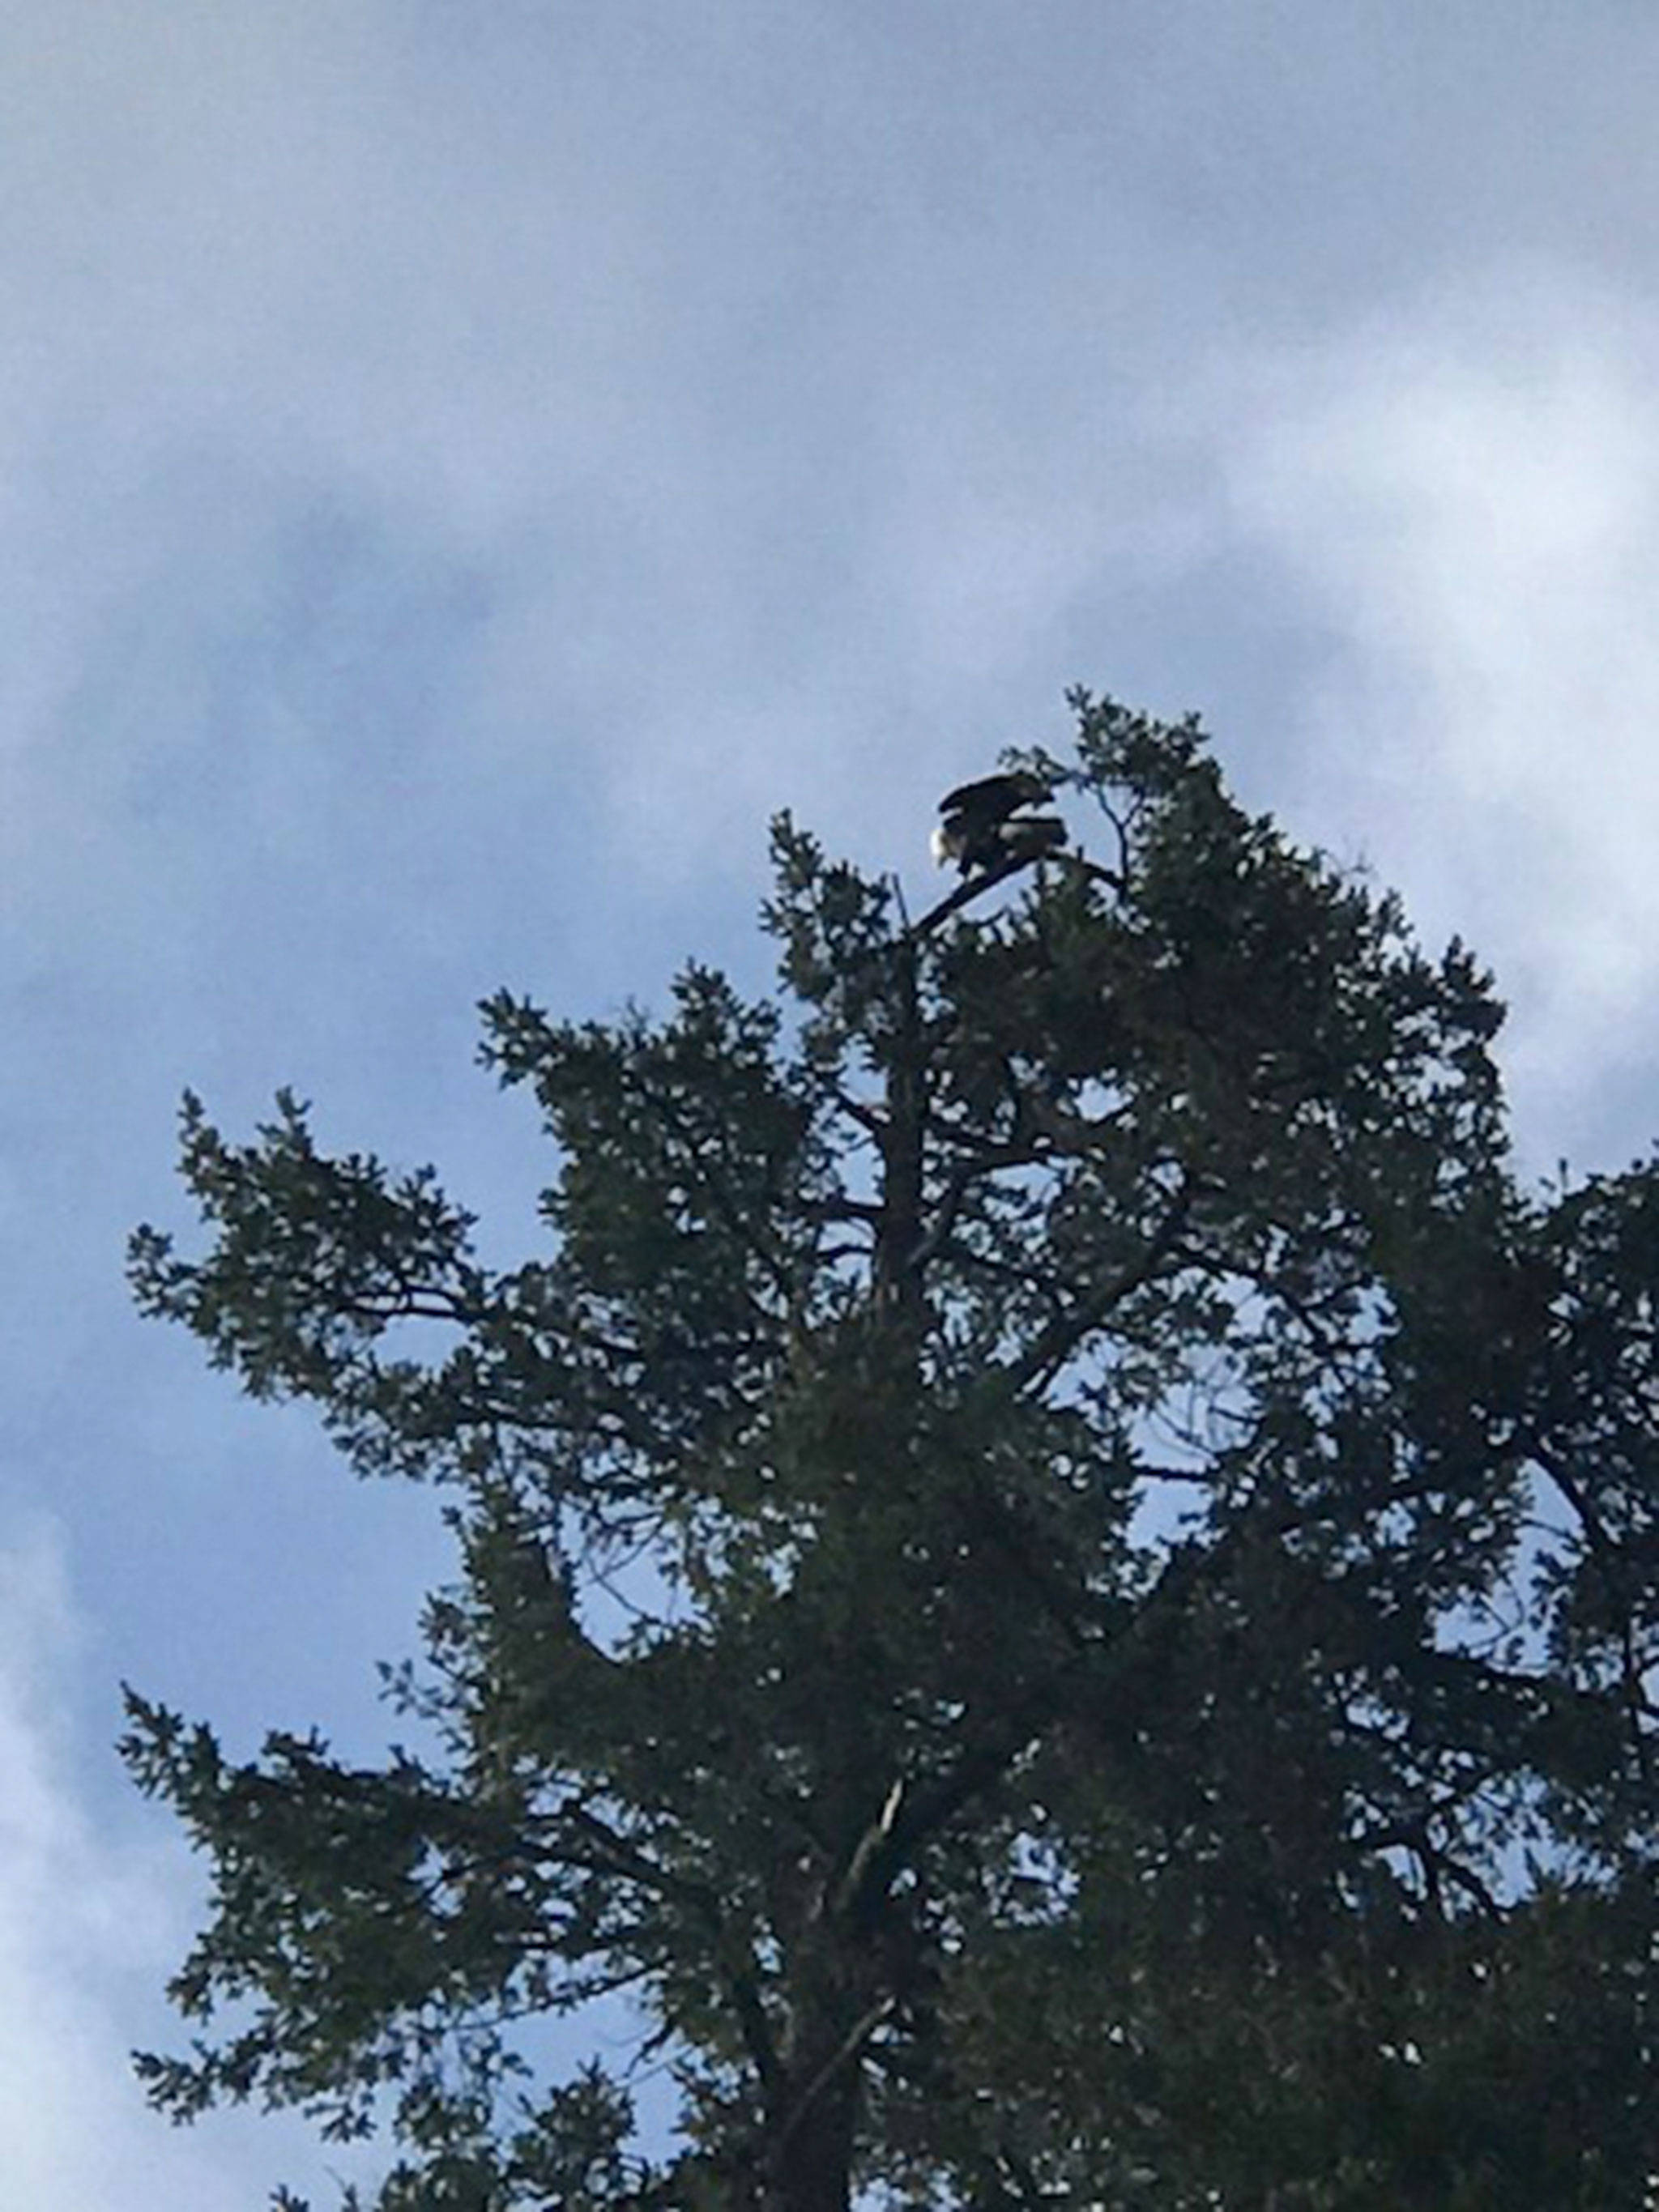 An eagle perches in the tree at 4825 E. Mercer Way, where a new single family home plan has concerned neighbors. Photo courtesy of Gerry Kaelin